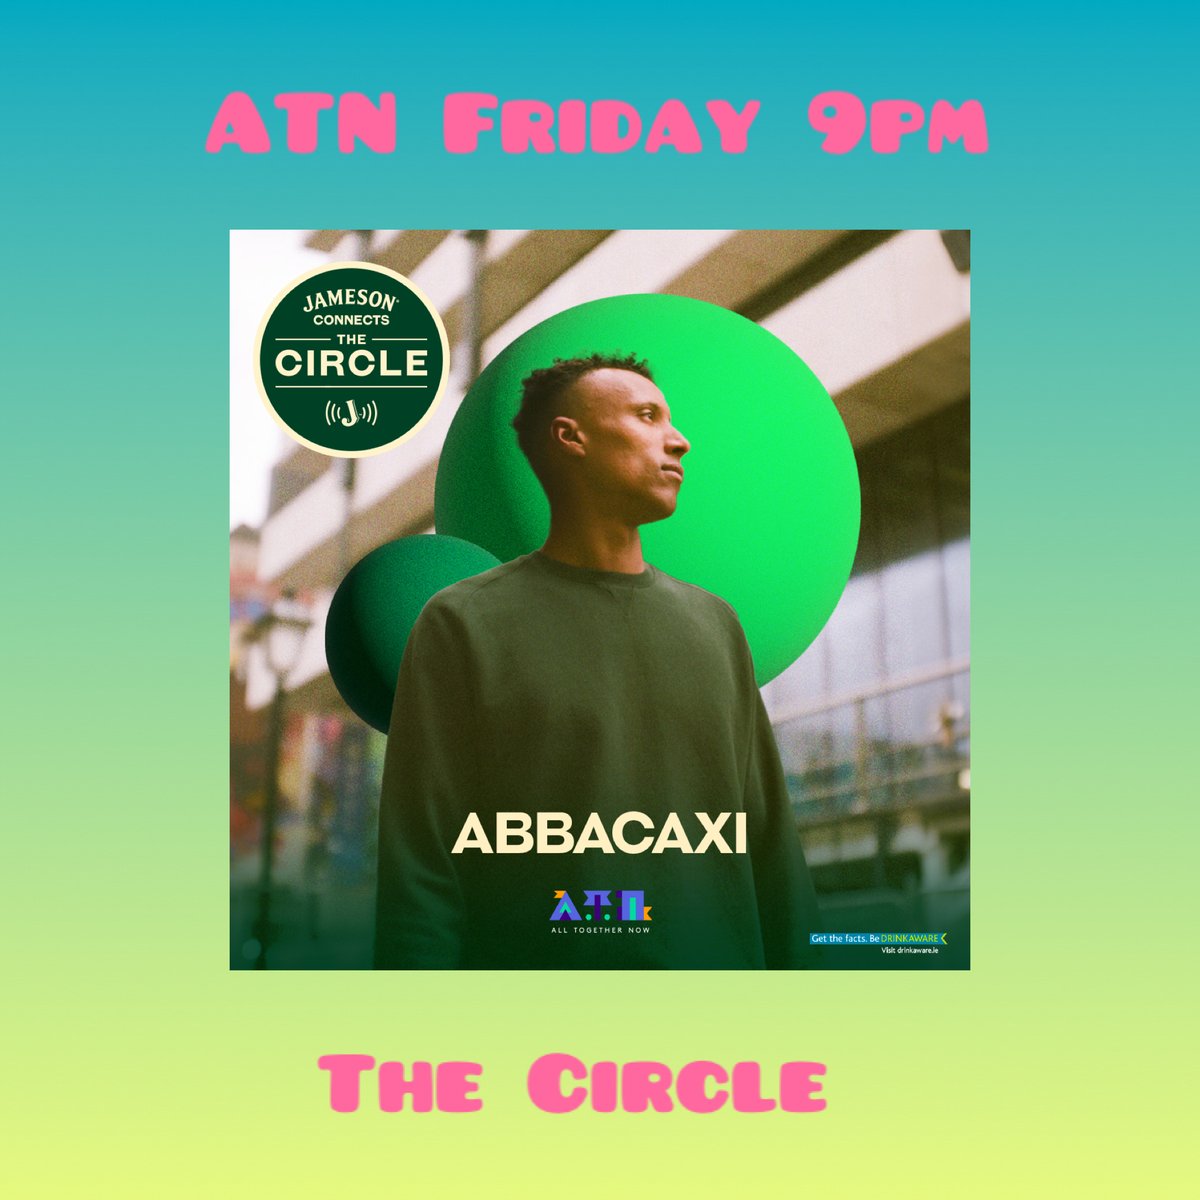 See you Friday at 9pm on The Circle at All Together Now! Looking forward to this show ⚡️